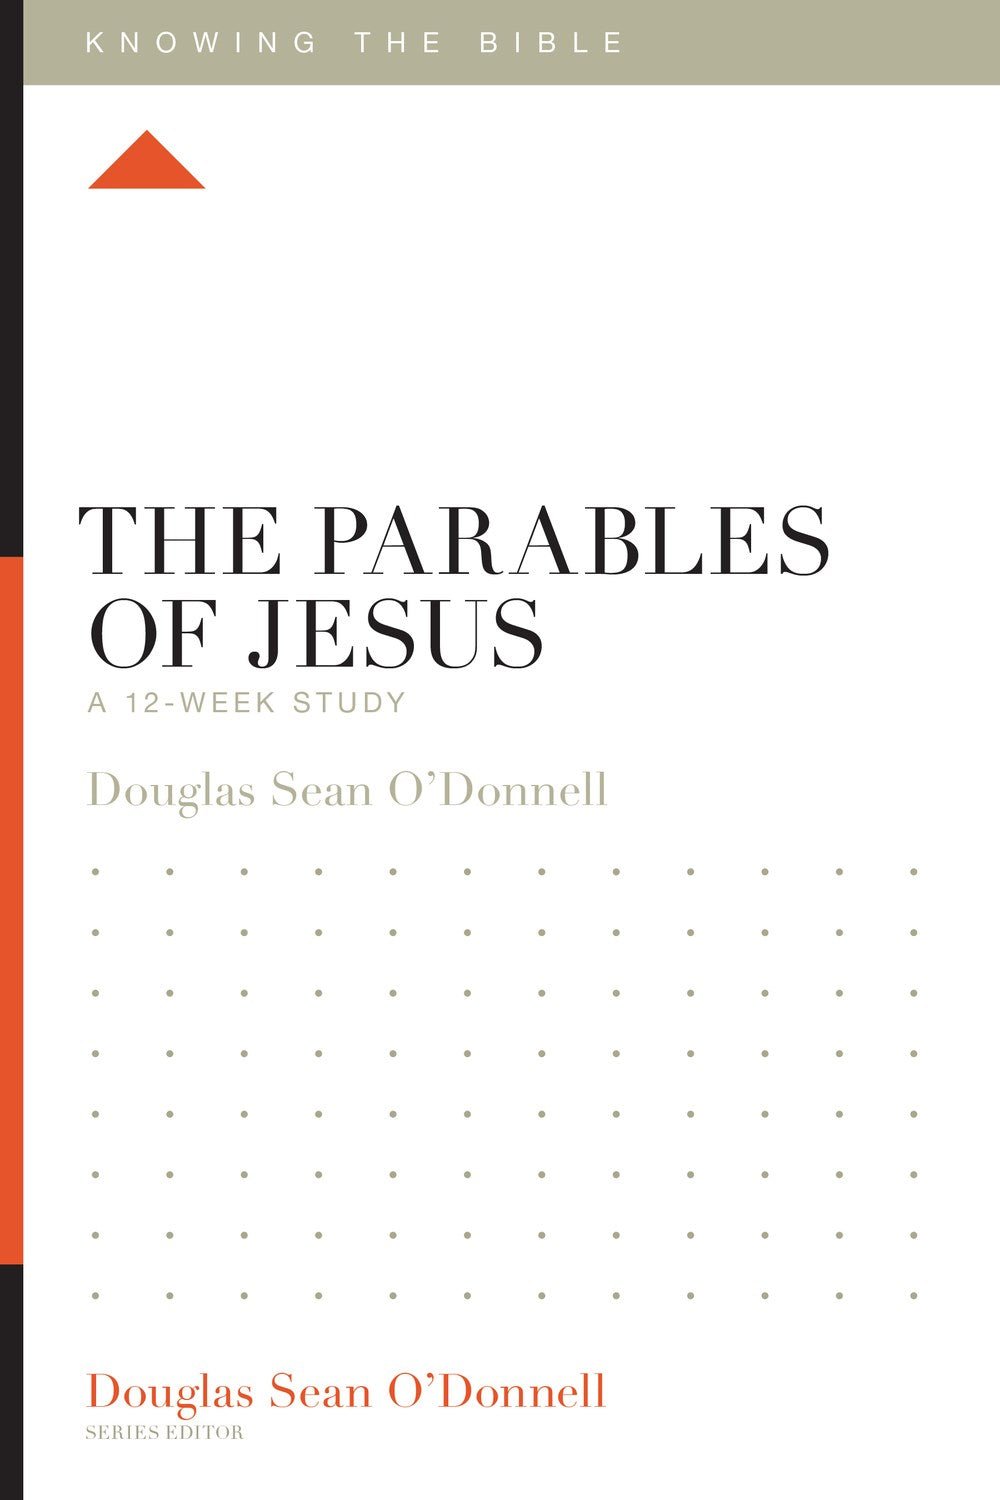 The Parables Of Jesus (Knowing The Bible)